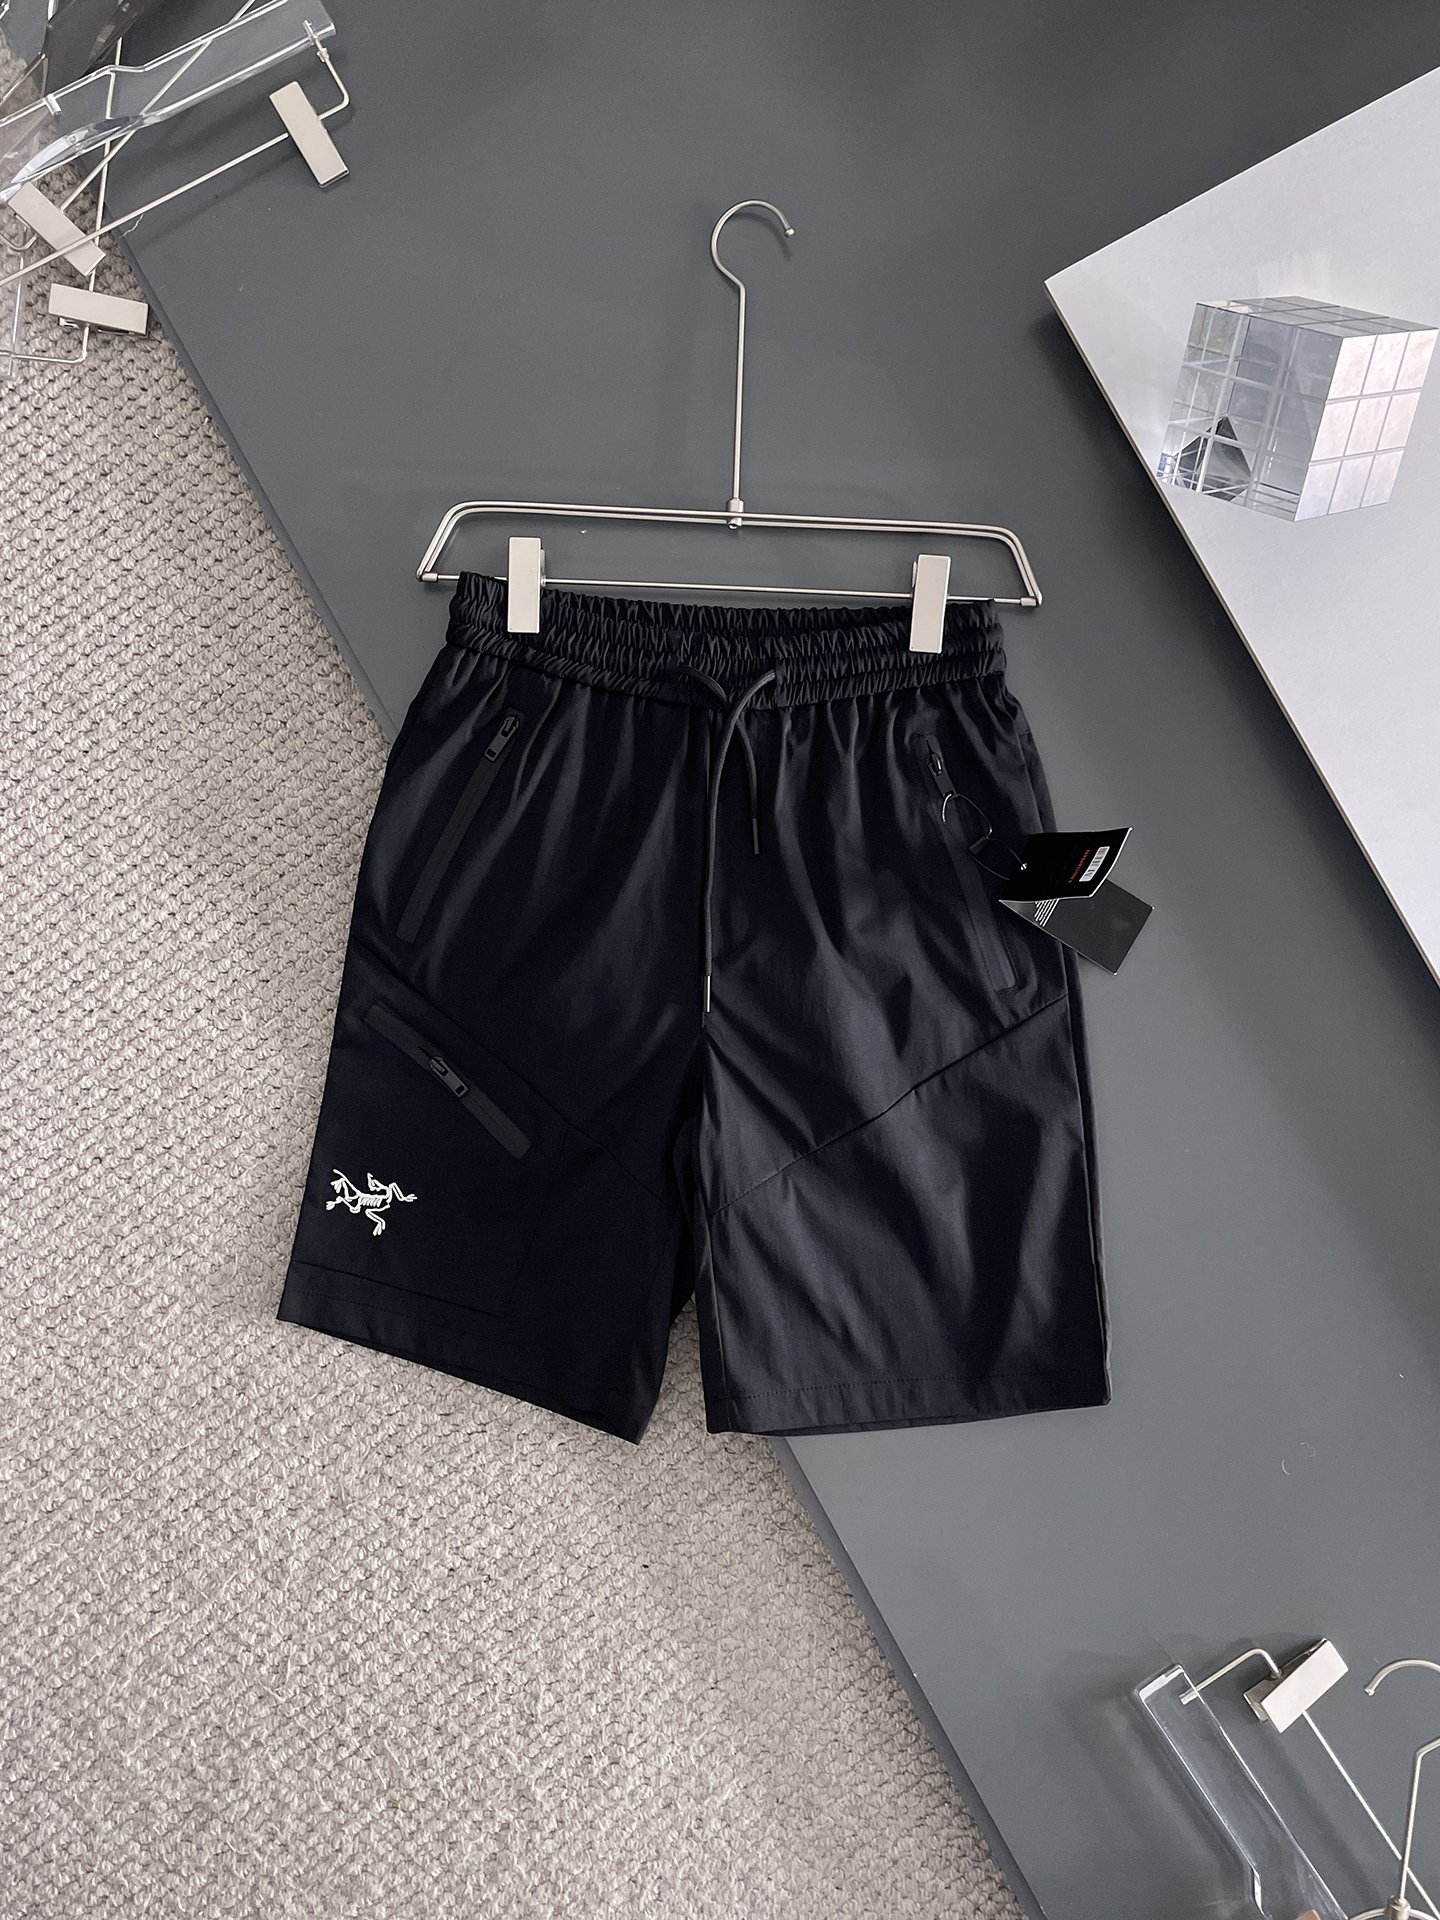 Arc’teryx Clothing Shorts Online From China Designer
 Men Summer Collection Casual